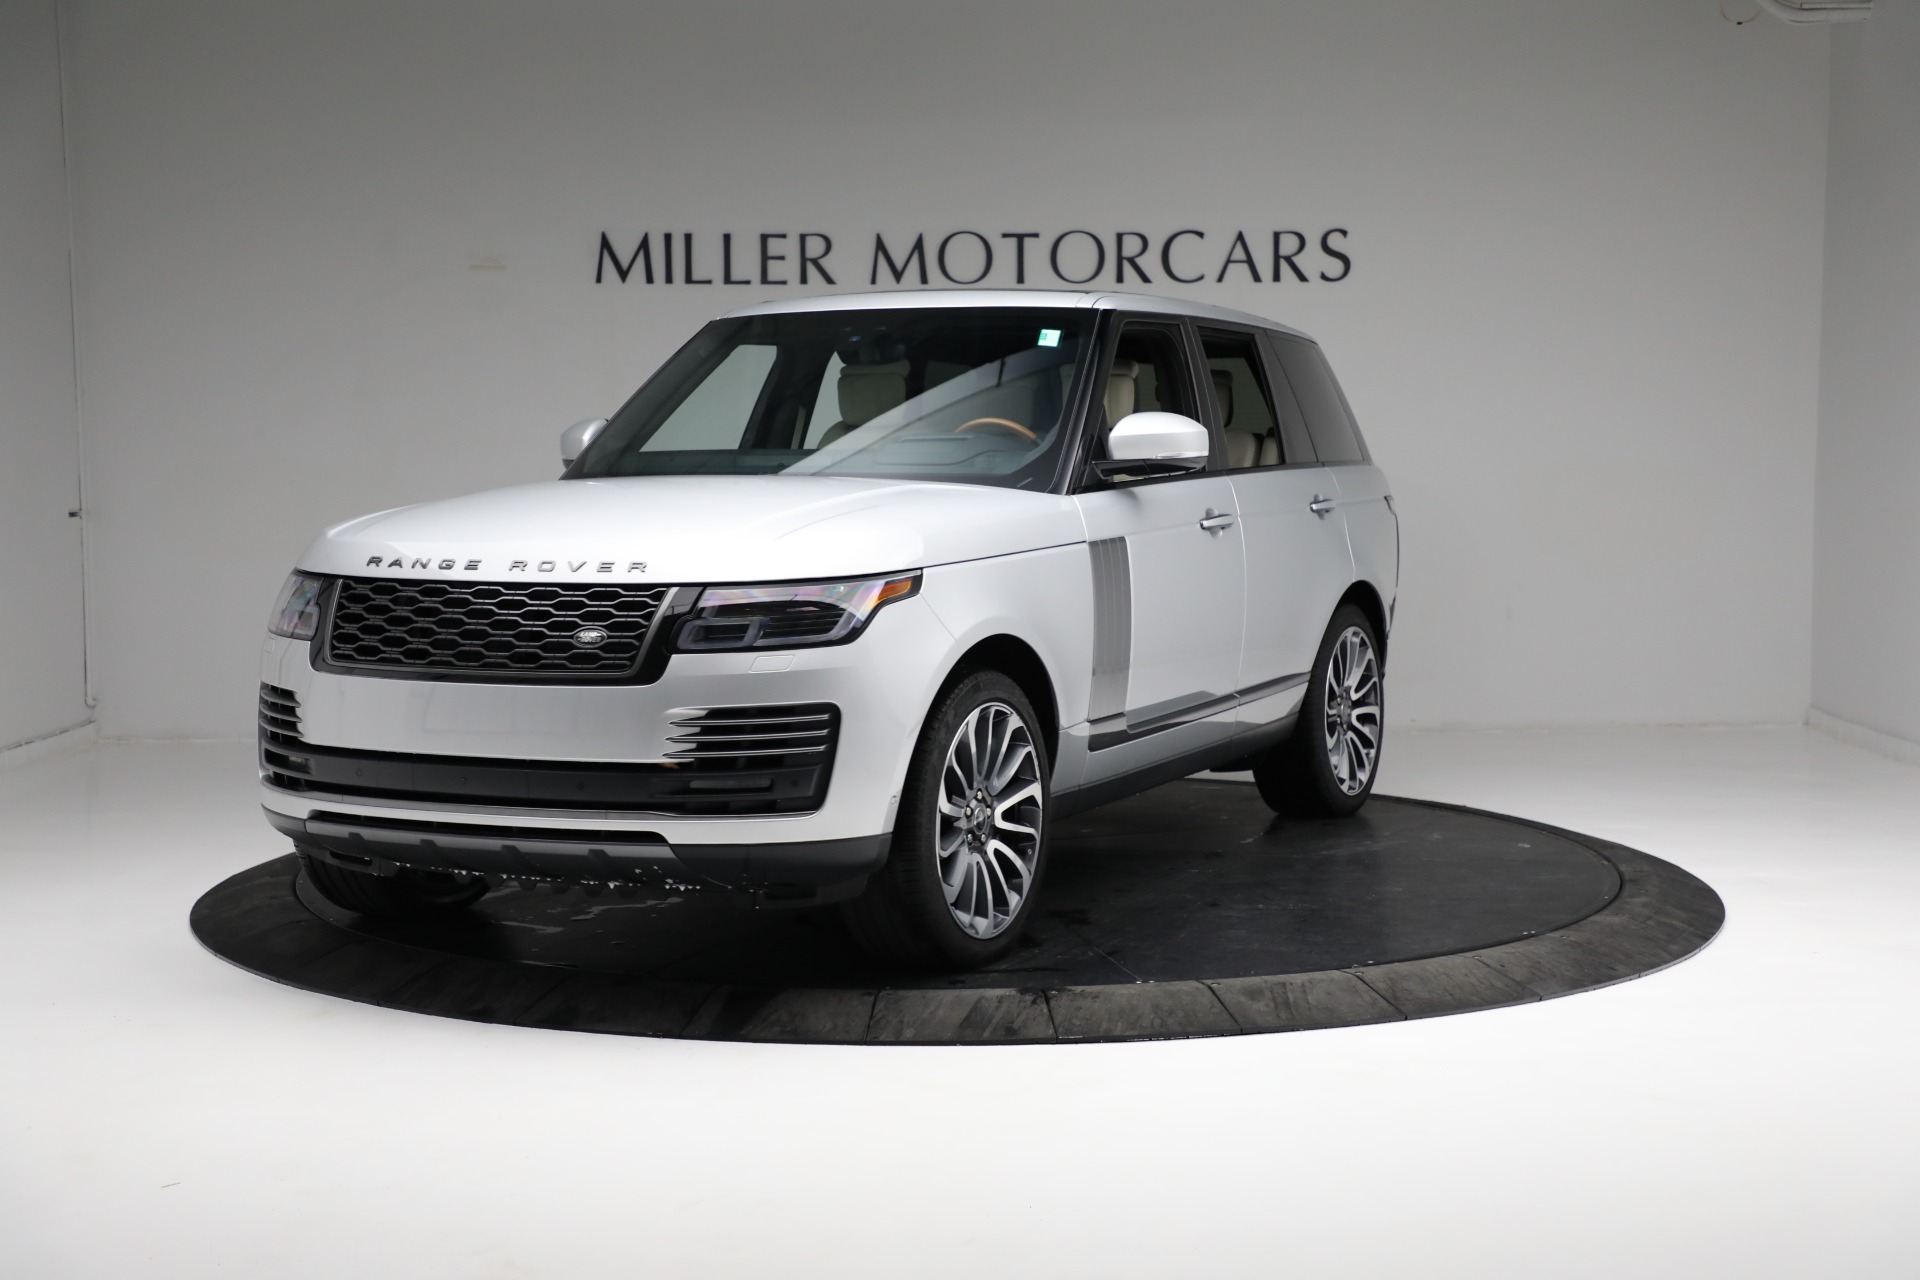 Used 2021 Land Rover Range Rover Autobiography for sale $145,900 at Rolls-Royce Motor Cars Greenwich in Greenwich CT 06830 1